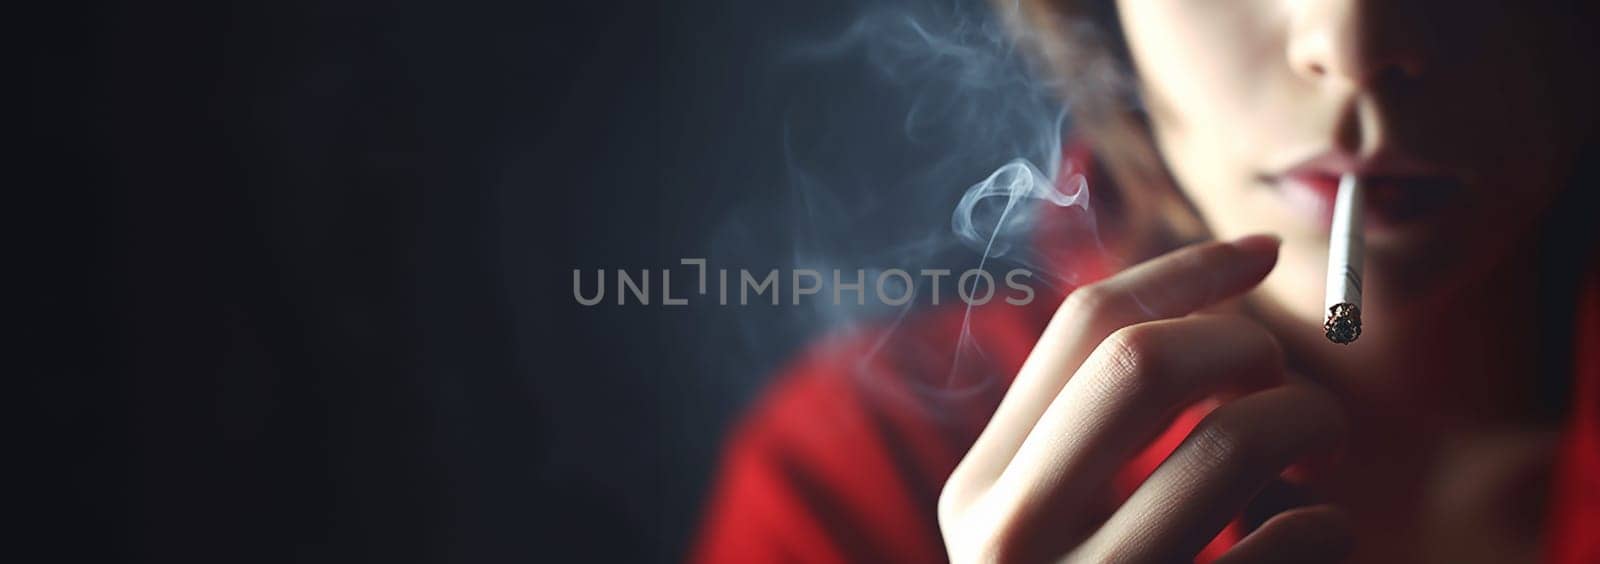 Concept for smoking in front of the child kid. A little child smoking a cigarette. Bad influence concept. Bad habit,health and safety and addiction background copy space Space for text